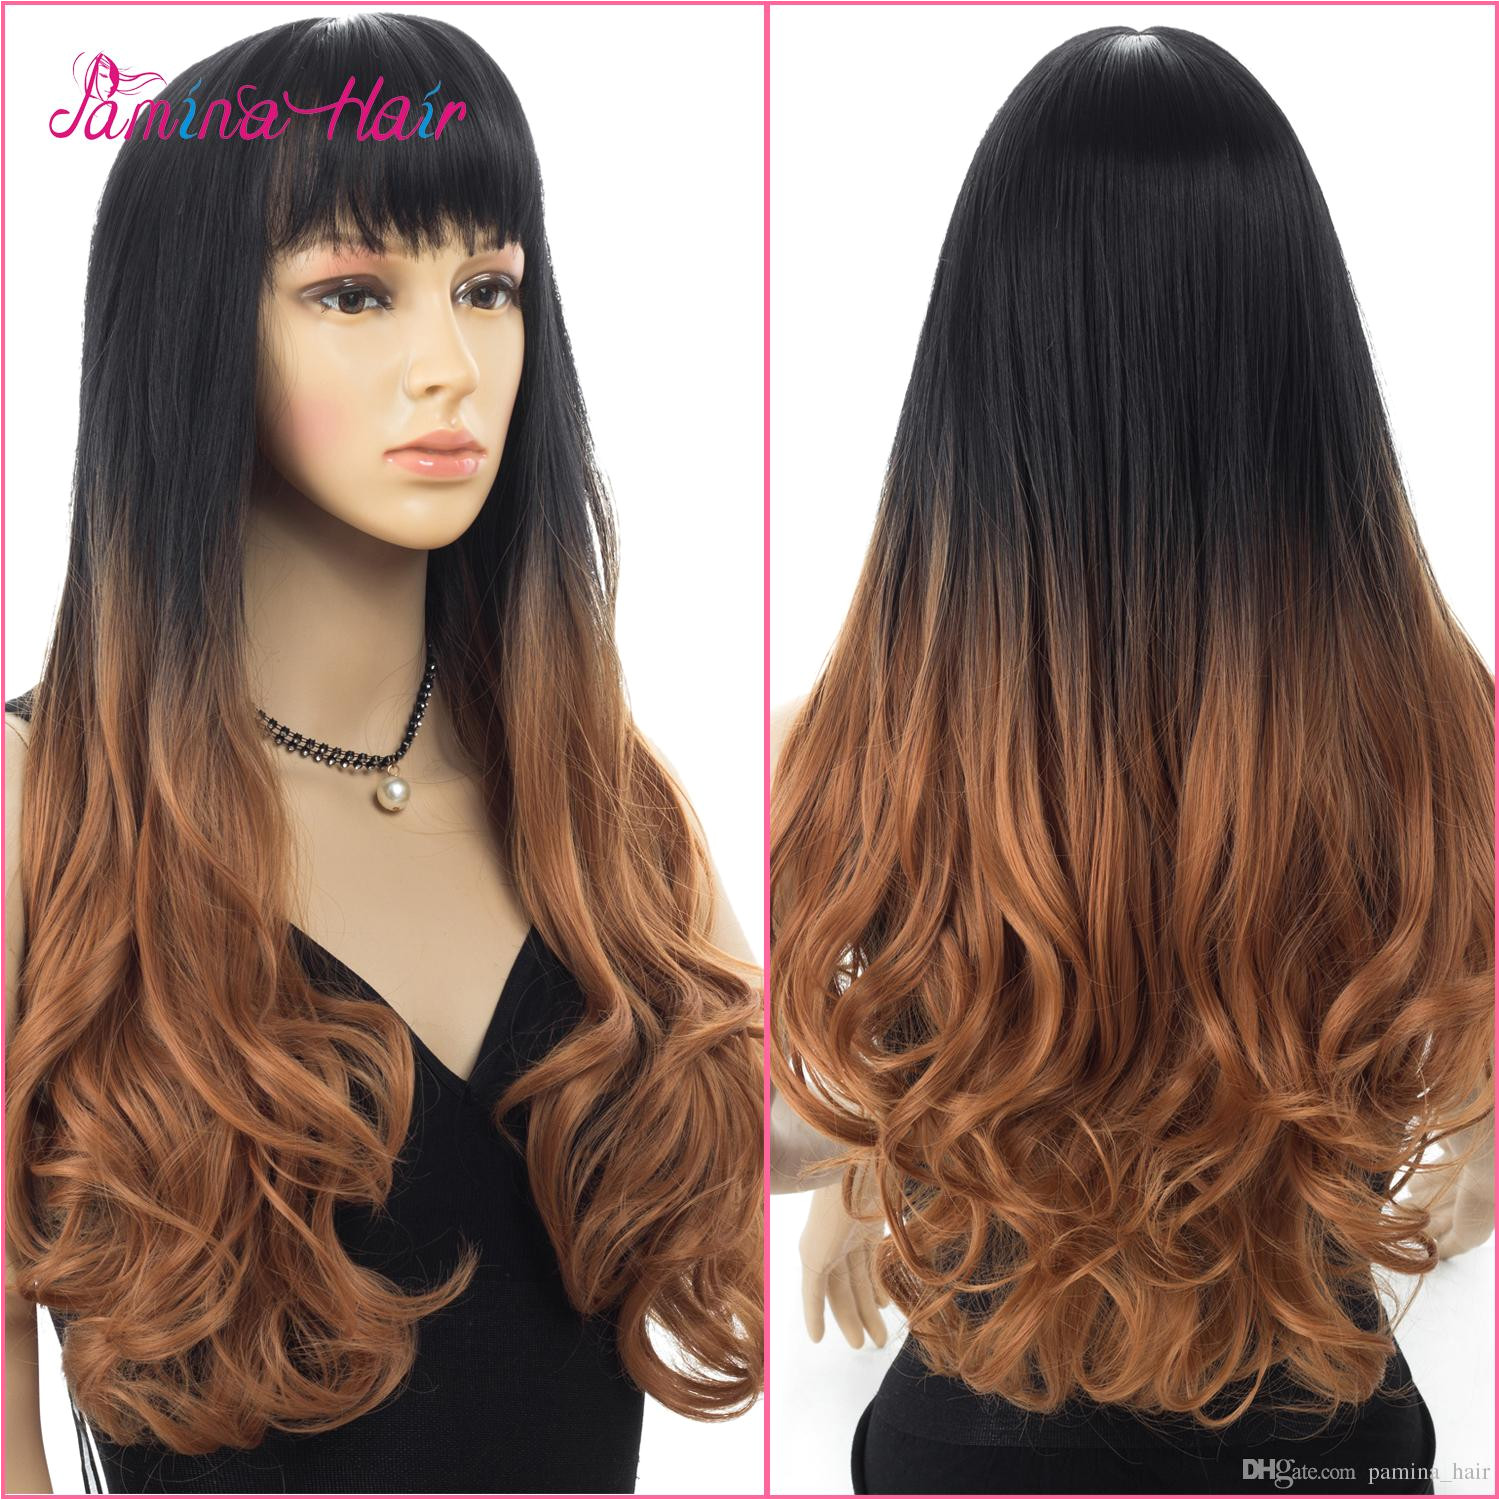 PAMINA Synthetic Ombre Wigs Good Quality Chemical fiber head cover soft and smooth no shedding no tangle no chemail bleached as your own hair